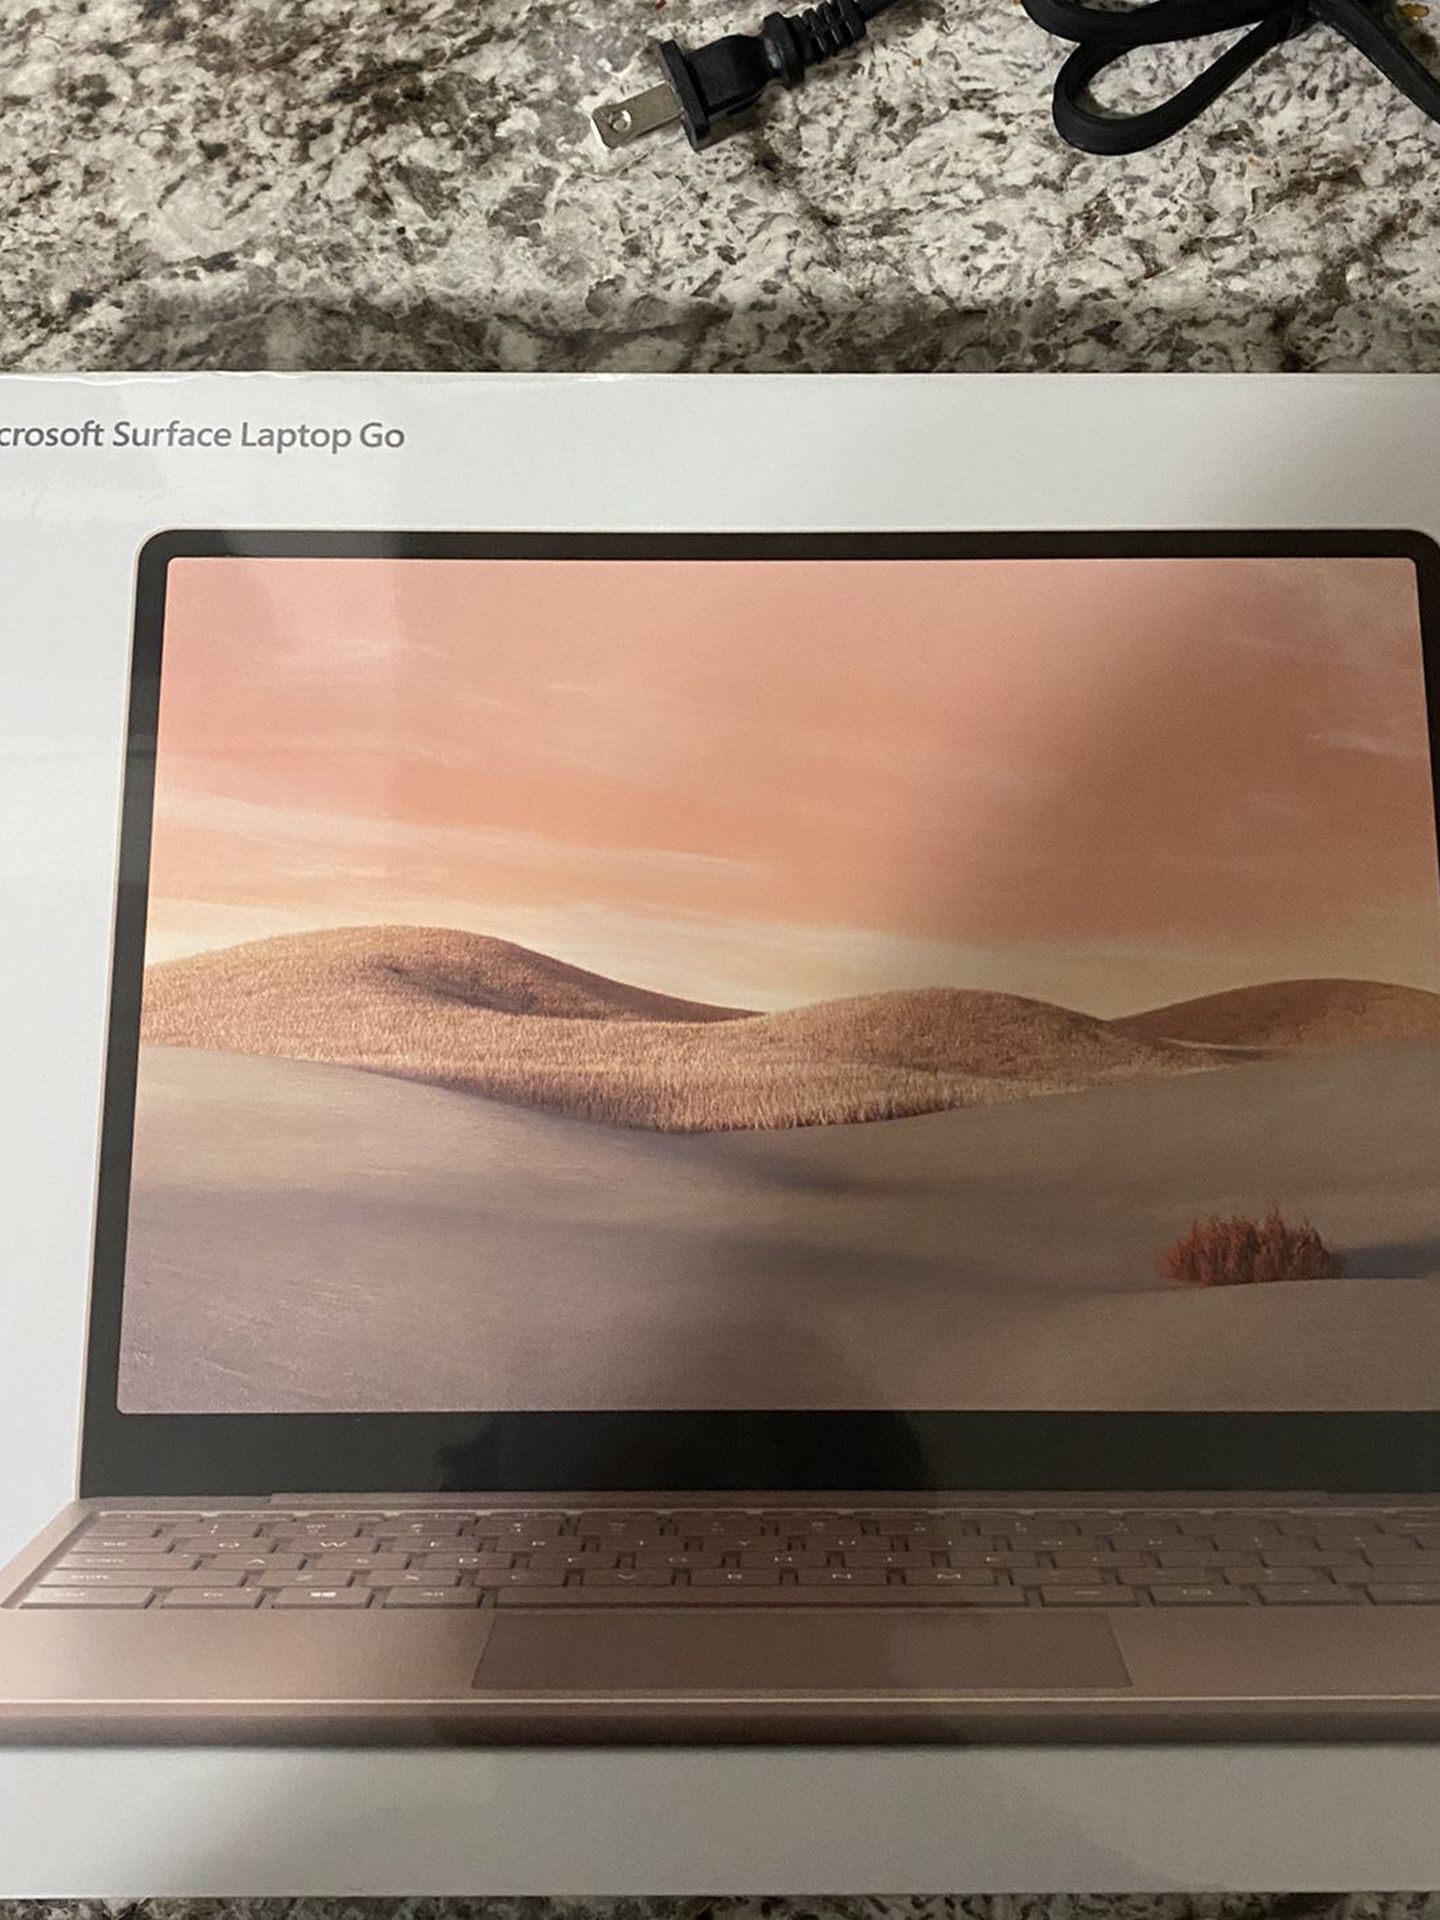 Microsoft Surface Laptop Go text {973 info 558 text 8633} canʼt respond on here